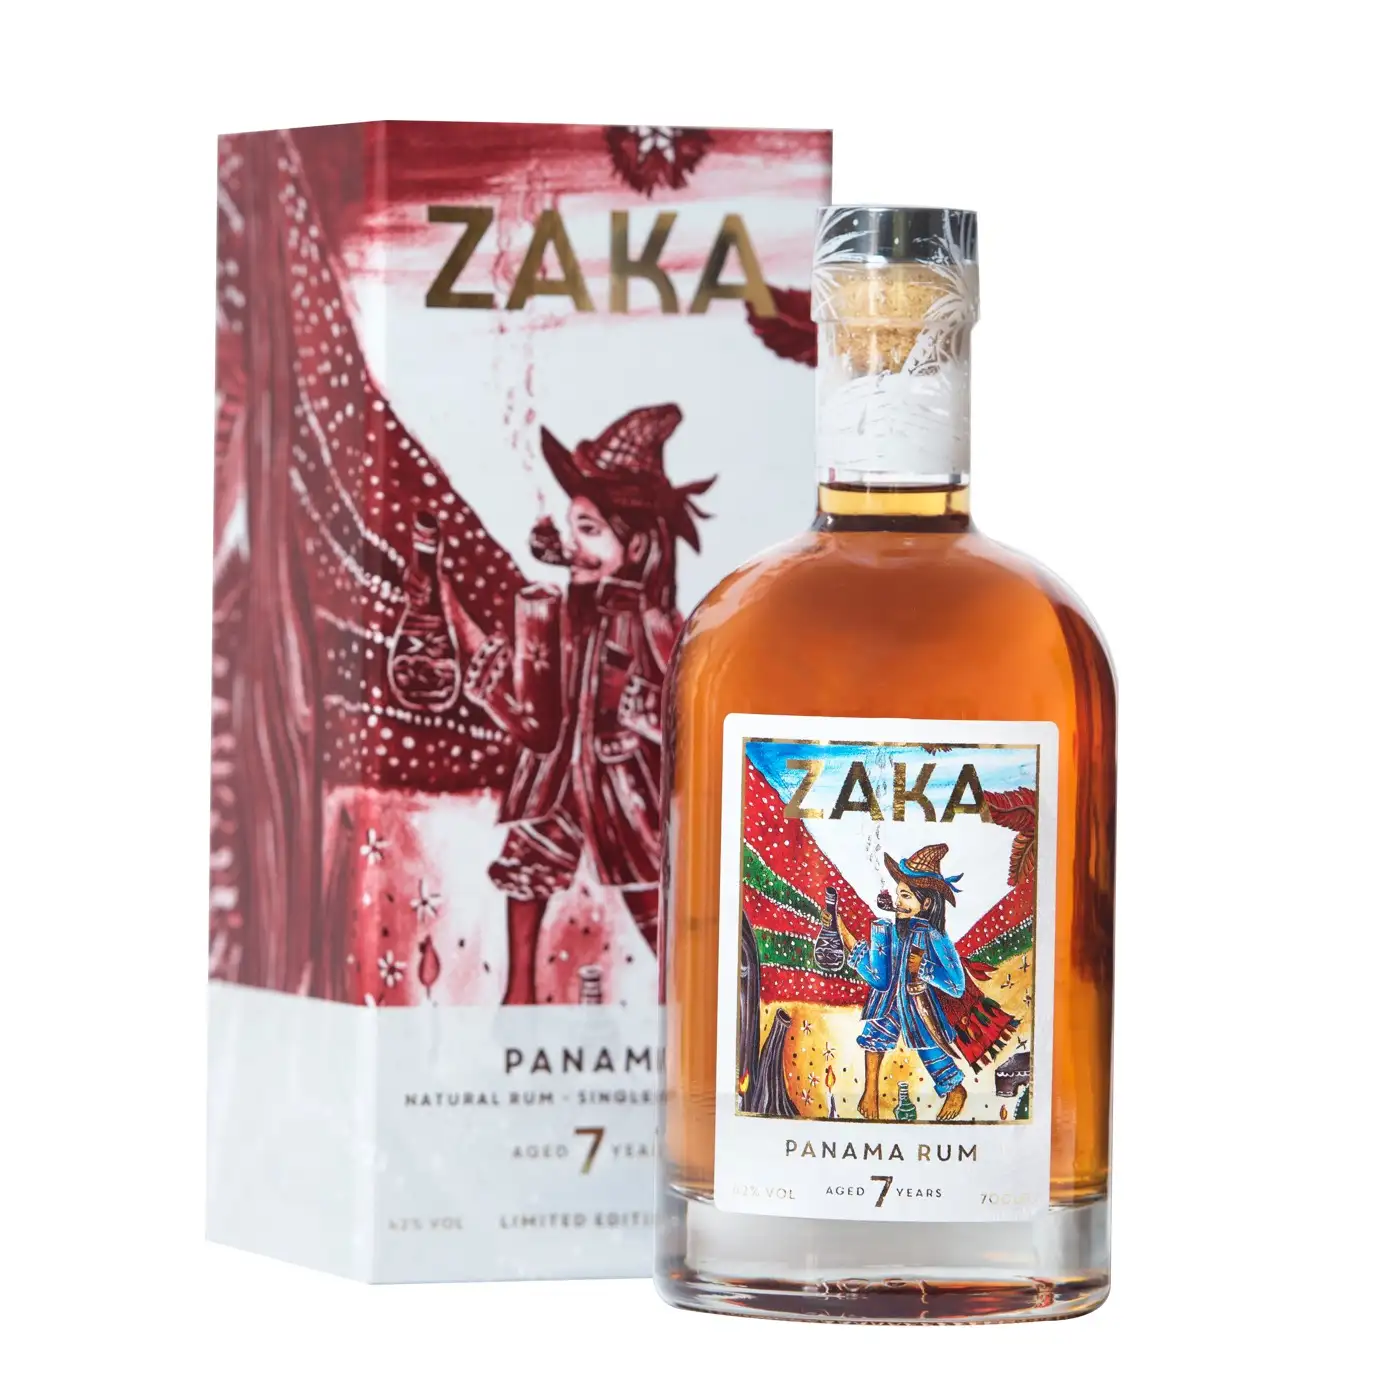 Image of the front of the bottle of the rum Zaka Panama